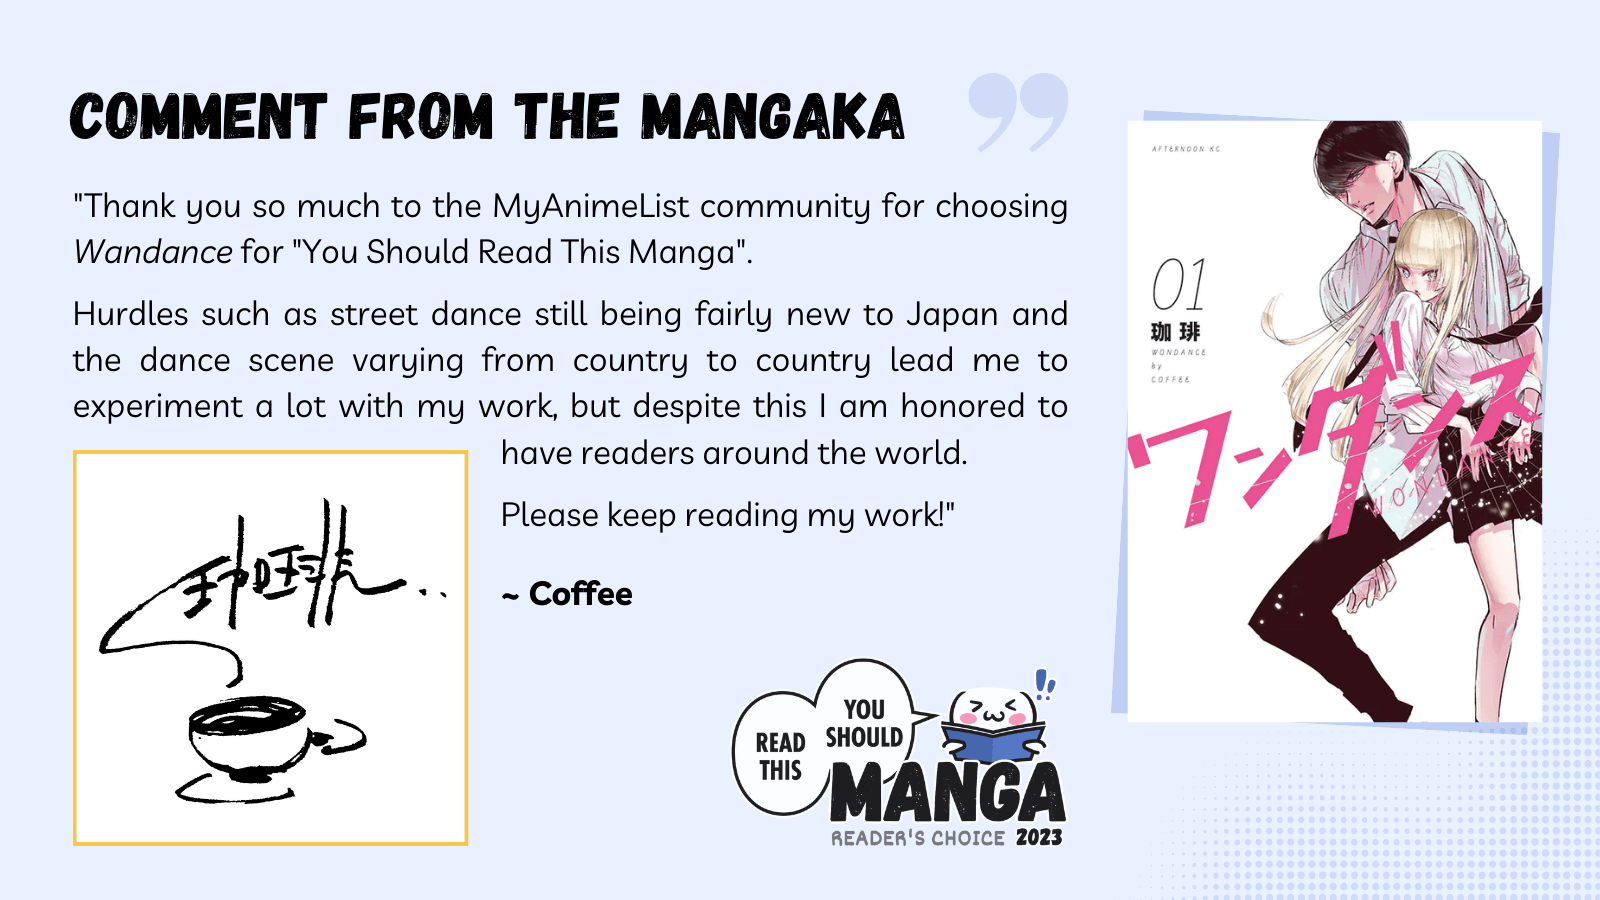 Comment from the mangaka of Wondance